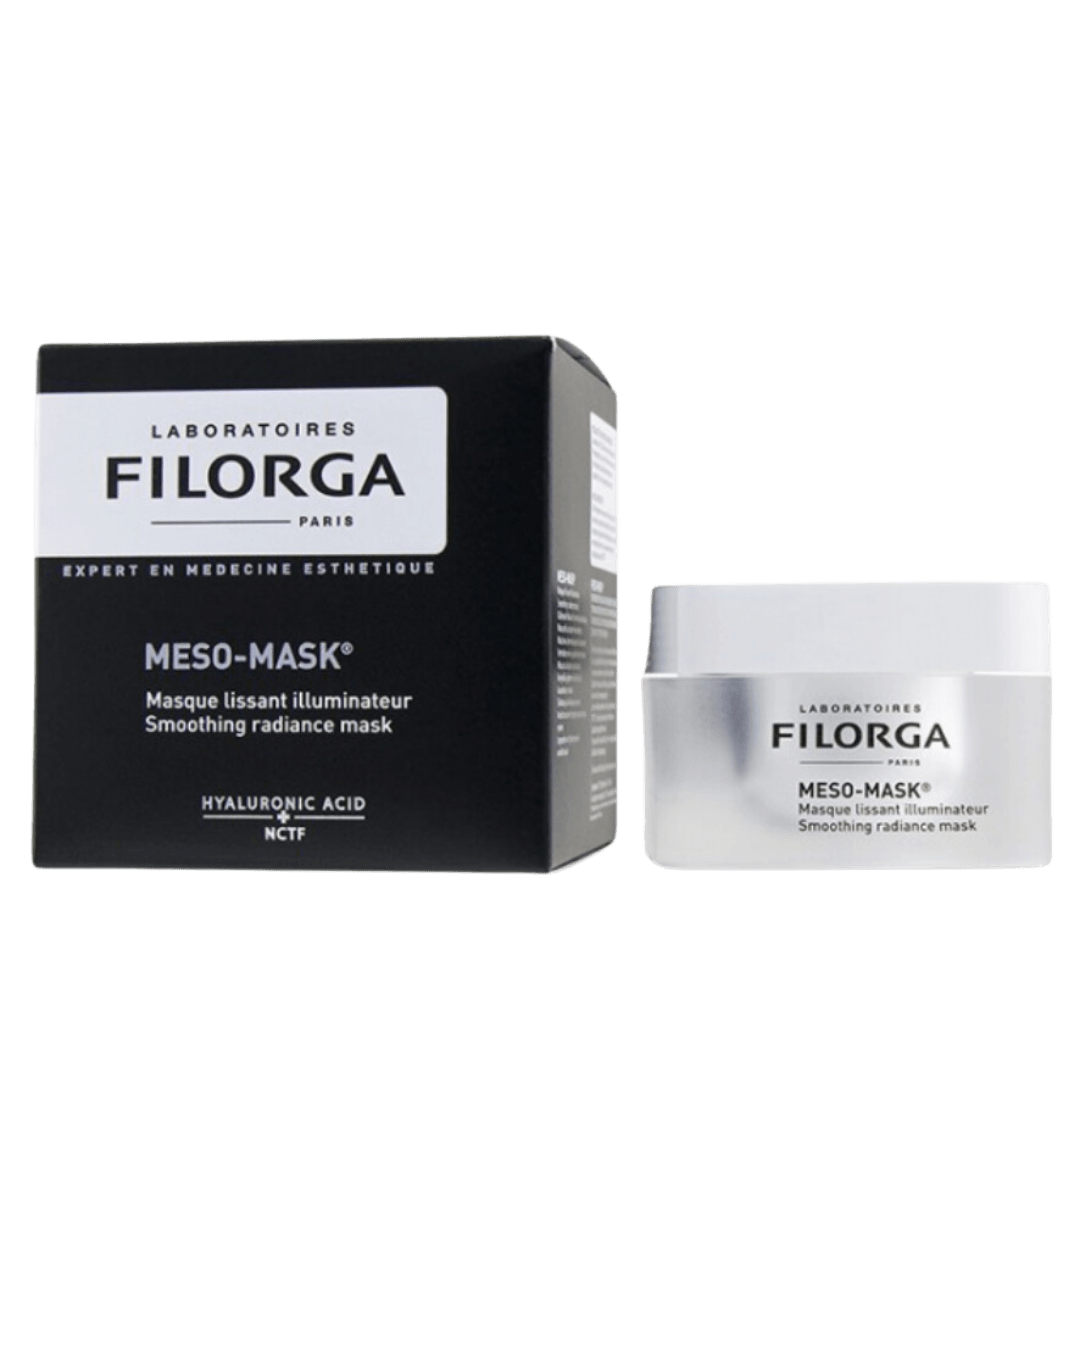 Daily Vanity Beauty Awards 2024 Best Skincare Filorga MESO-MASK Voted By Beauty Experts